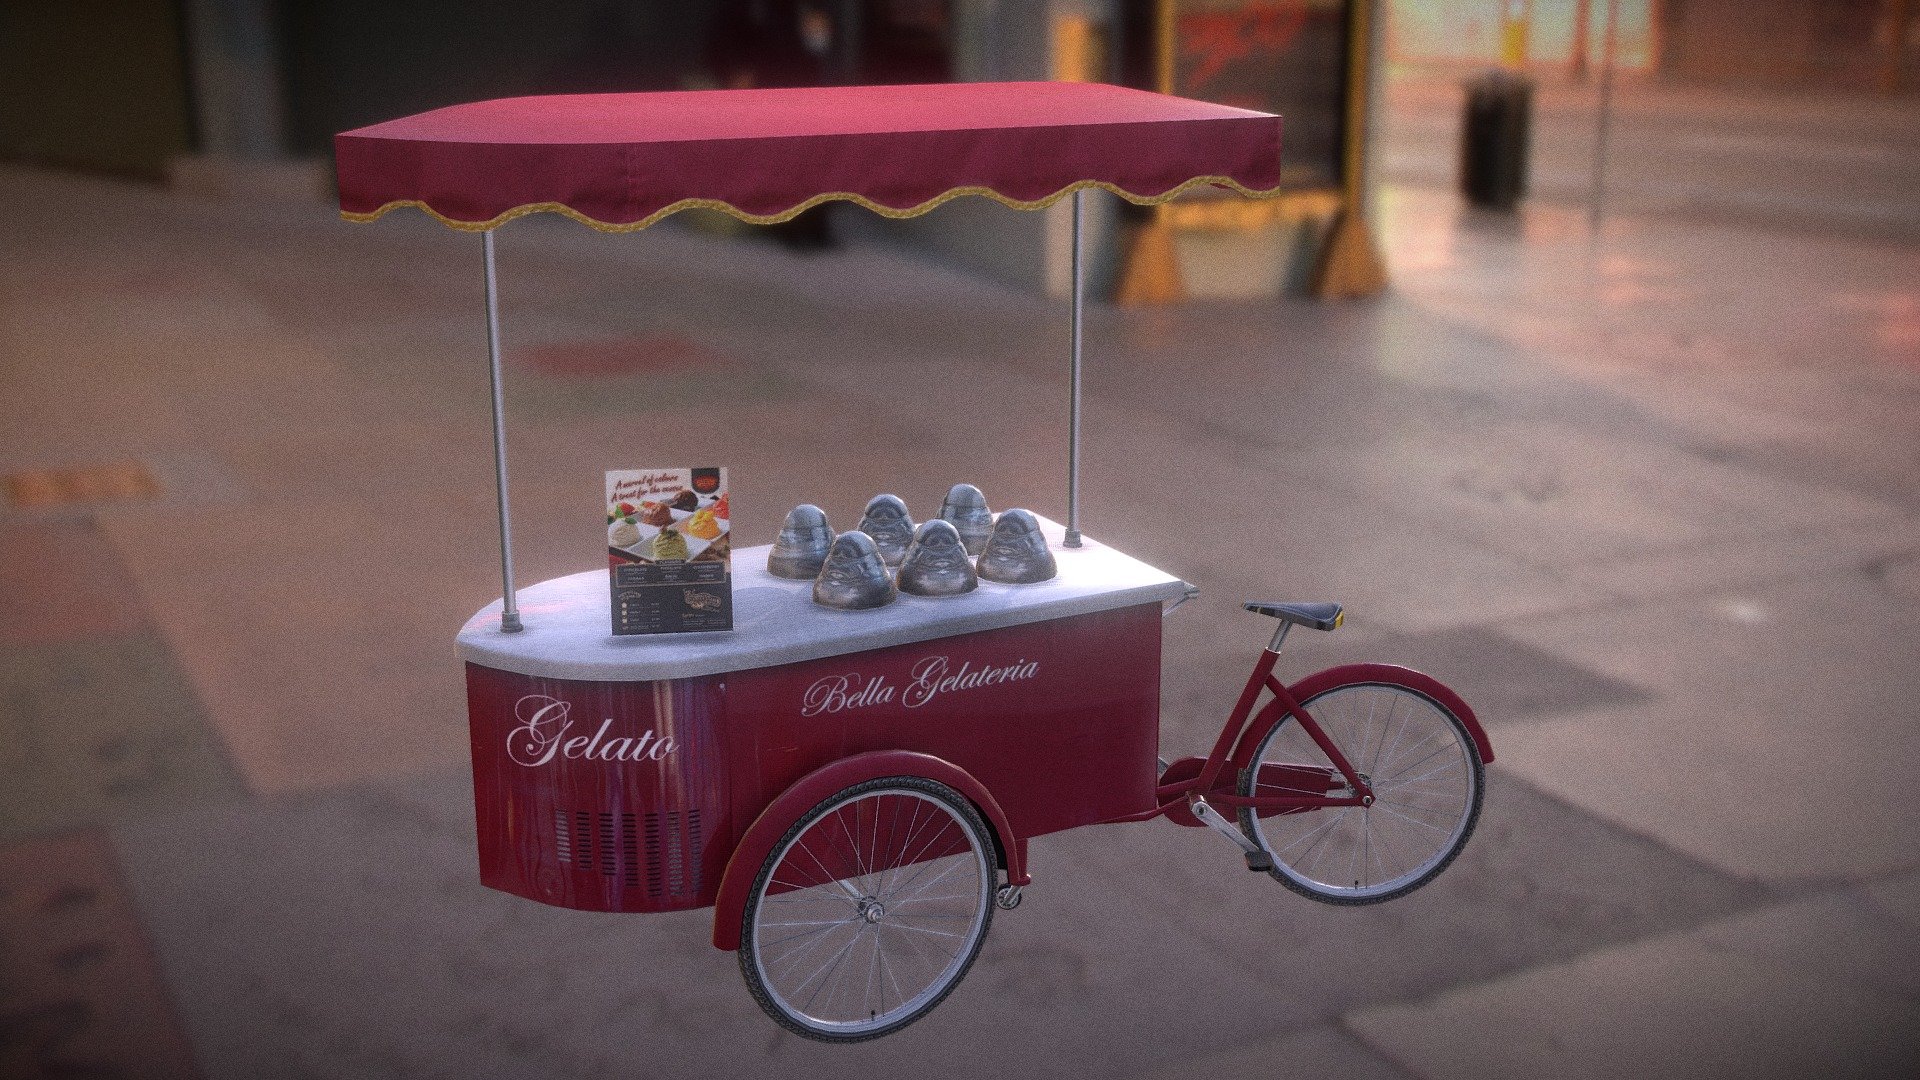 Mobile ice cream bike tricycle Cargo Gelato cart hot dog barbecue food shopping fixed trolley sweets for sale  -link removed-  P.S thanks for the help -link removed- - Mobile ice cream bike tricycle Cargo Gelato - 3D model by 8bit (@8_bit) 3d model